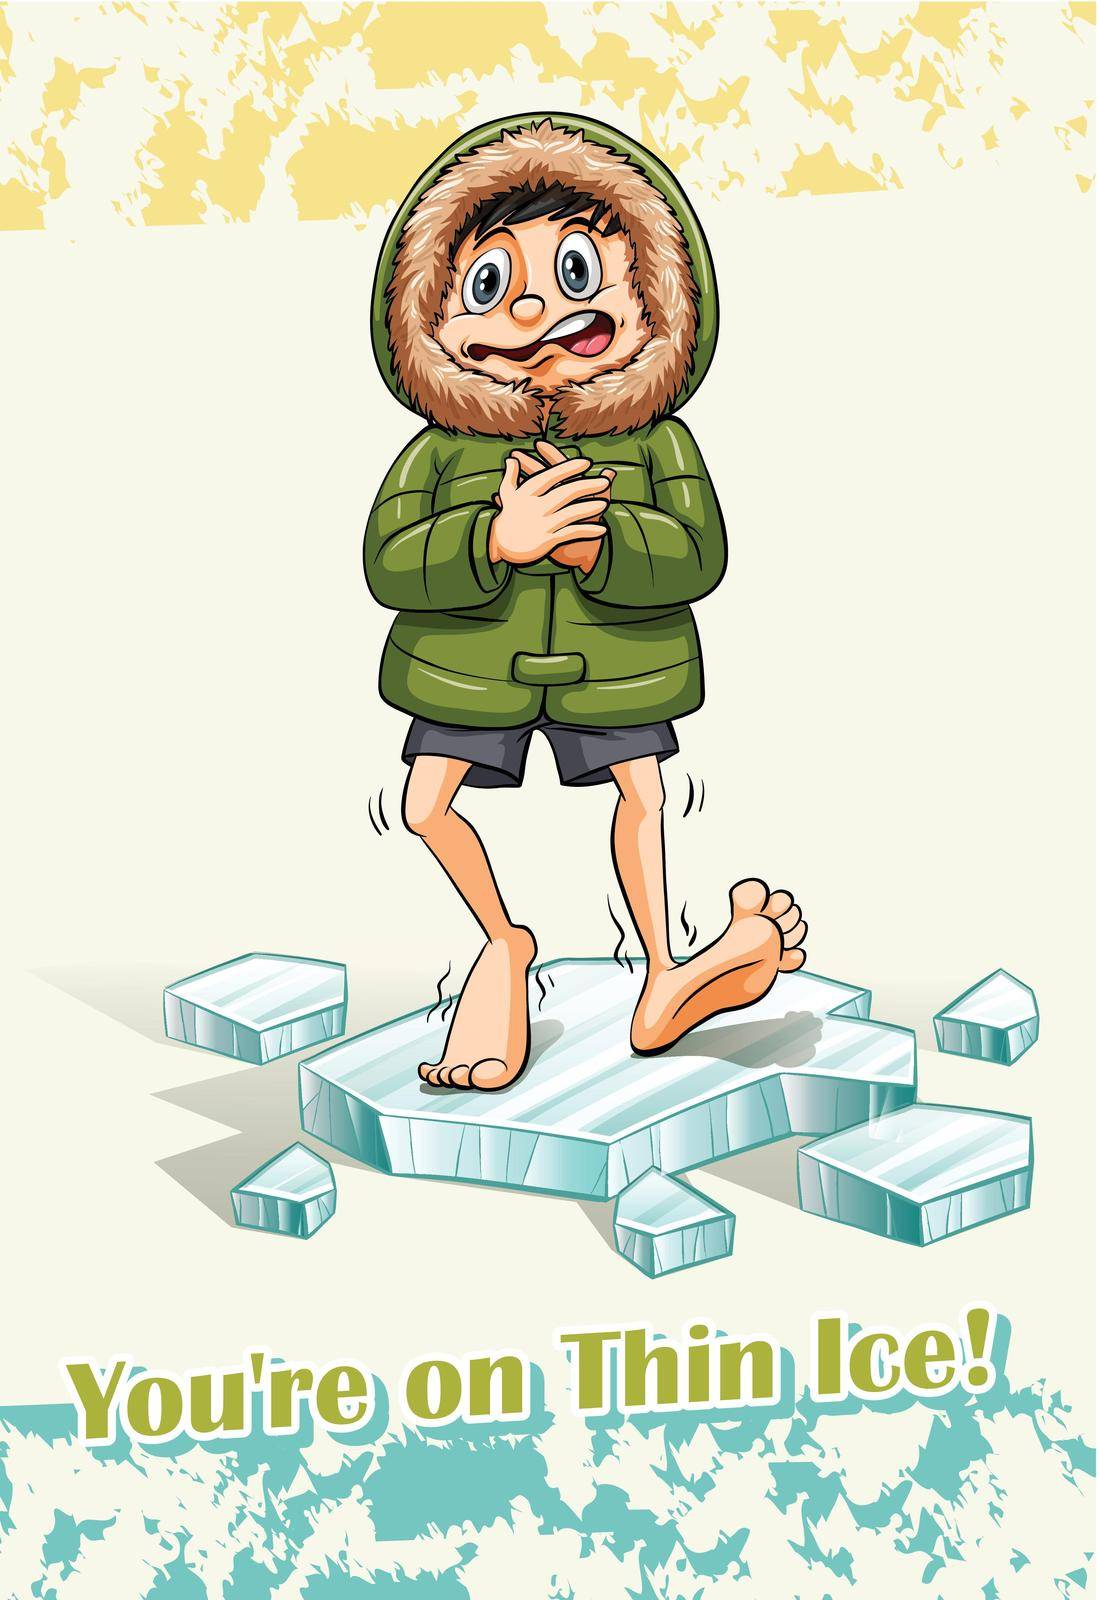 You're on thin ice illustration